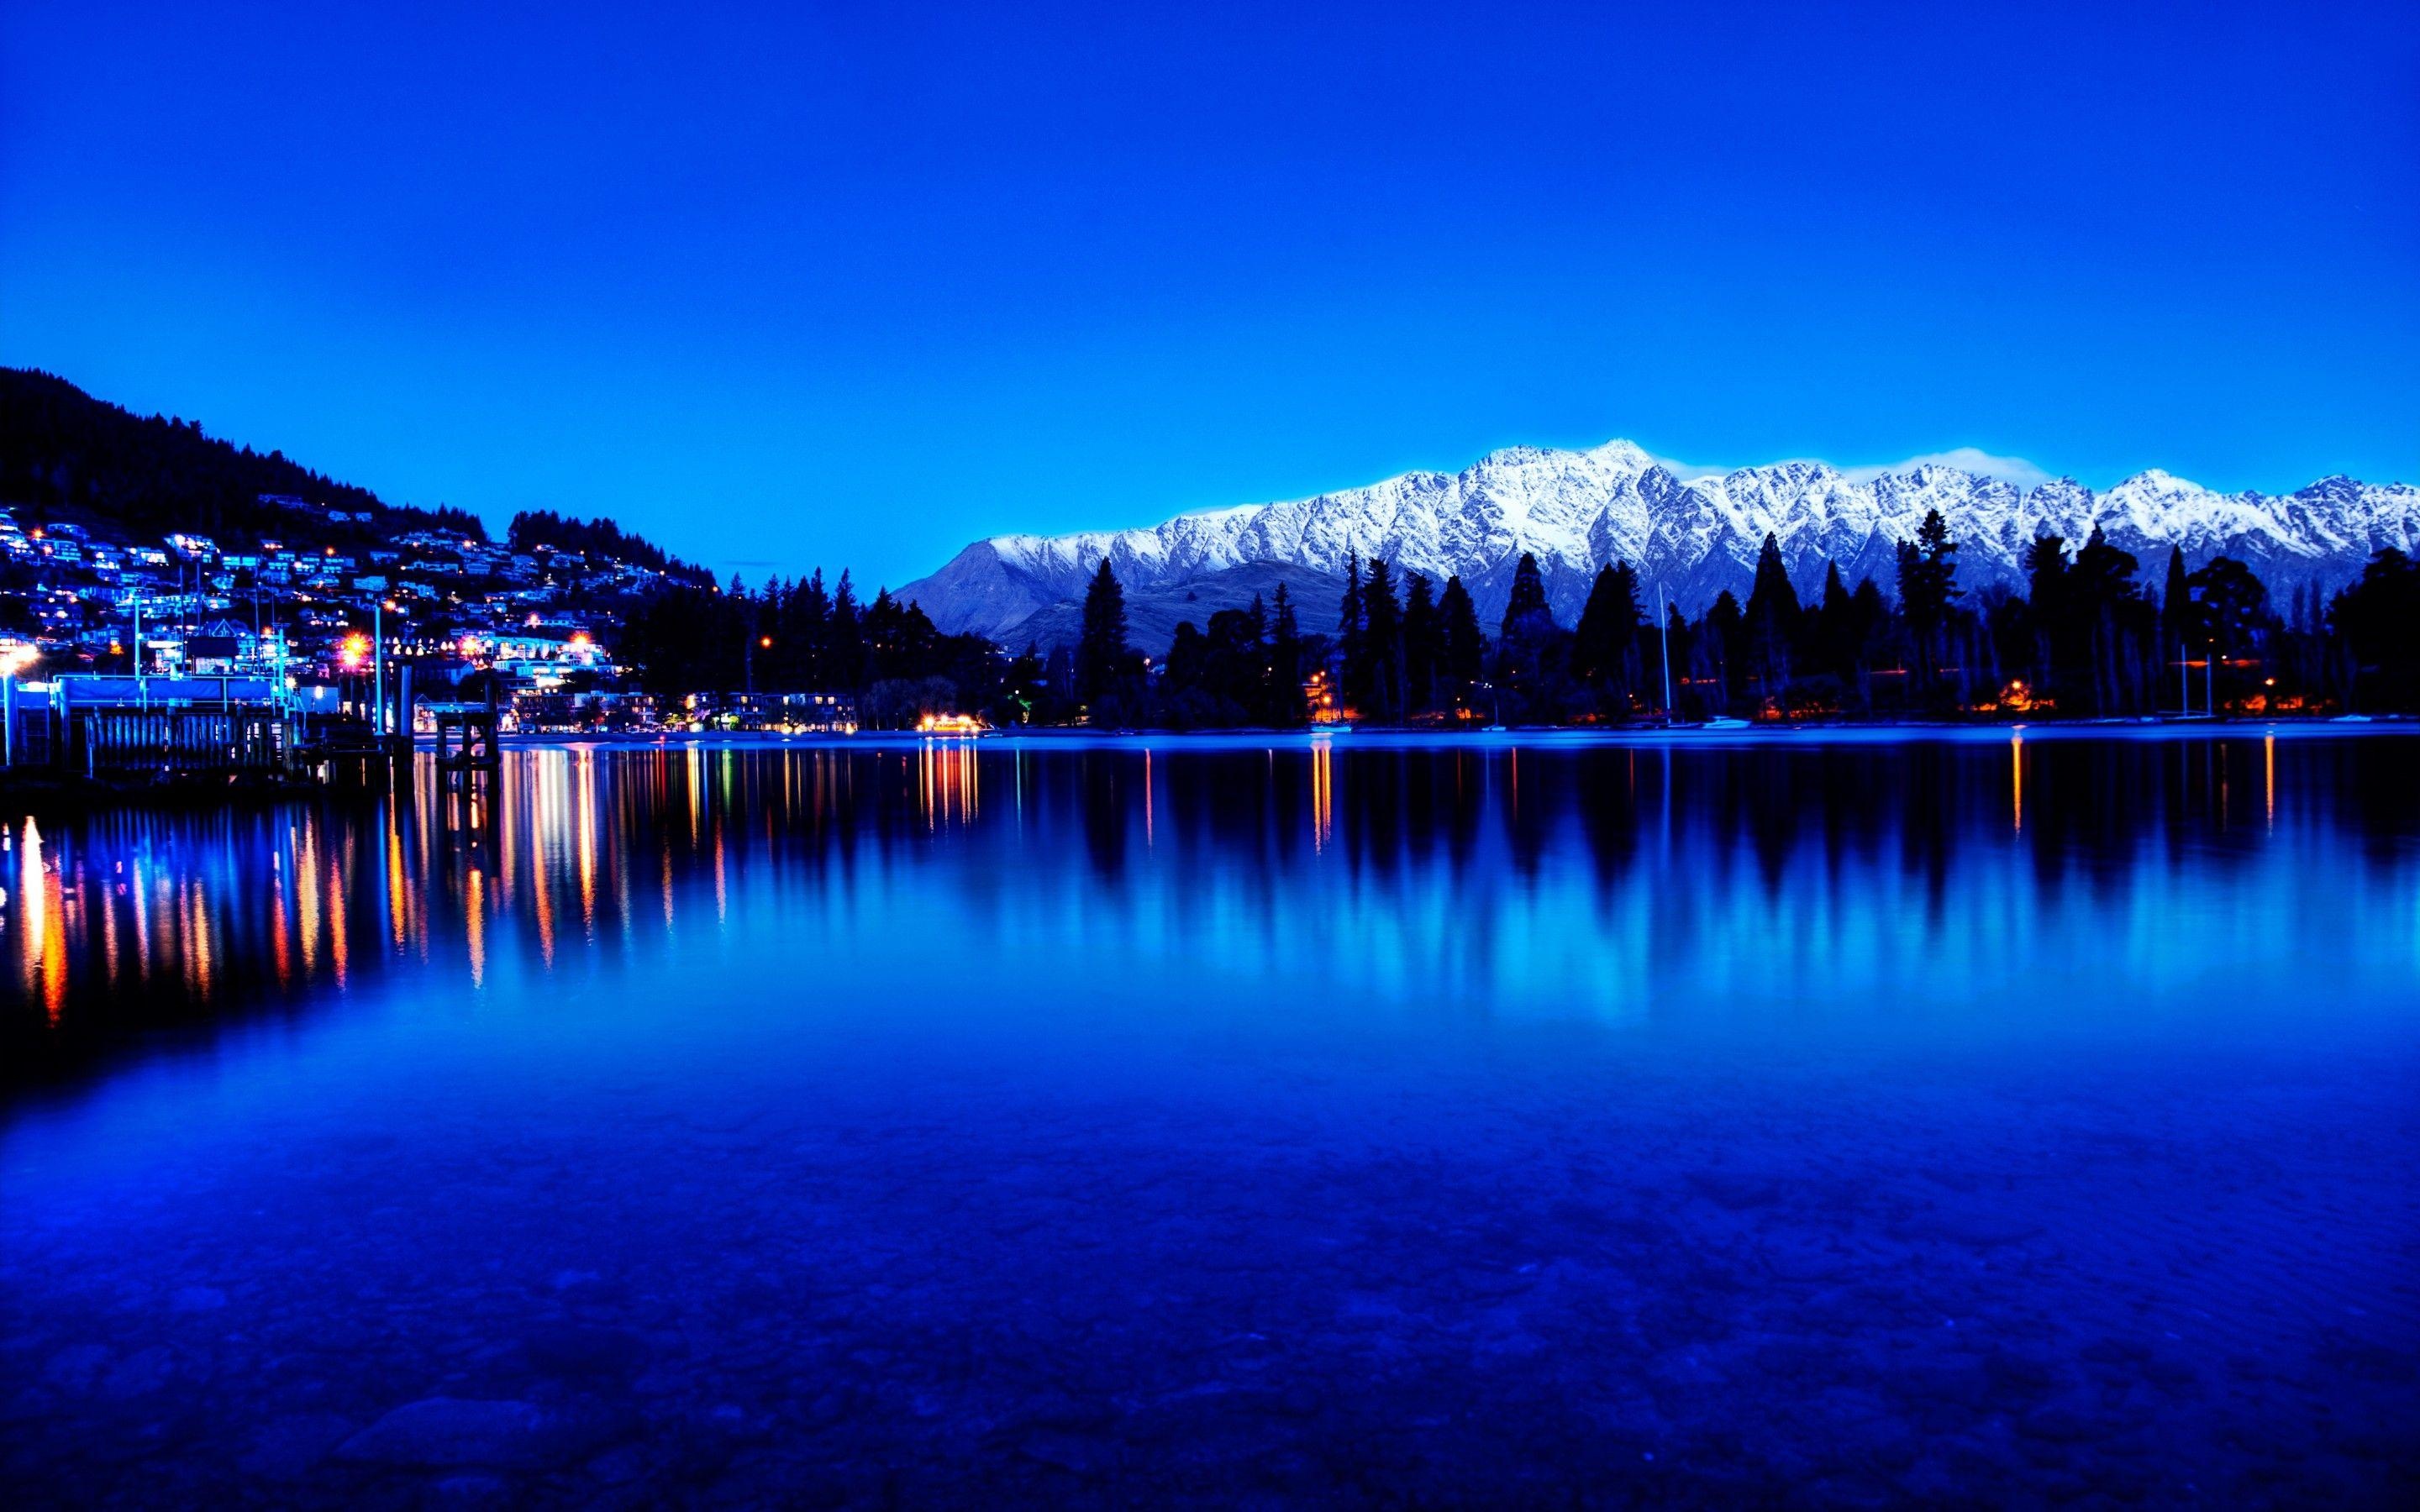 Blue Lake (New Zealand) Wallpapers (13+ images inside)